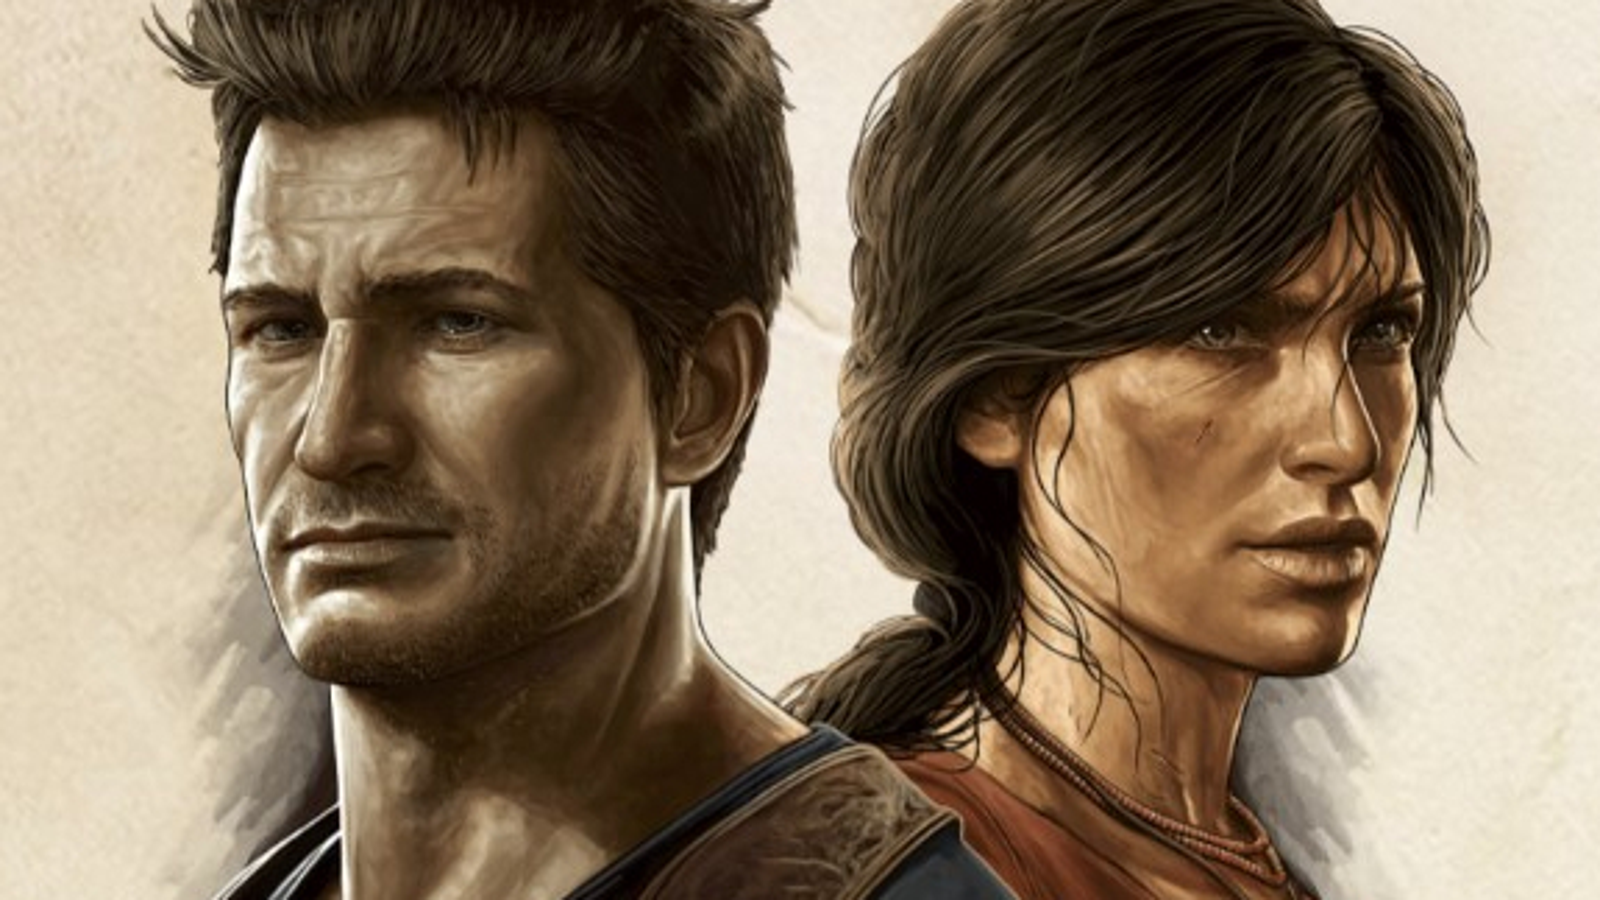 Uncharted: Legacy of Thieves Collection – Details on the remastered bundle  – PlayStation.Blog